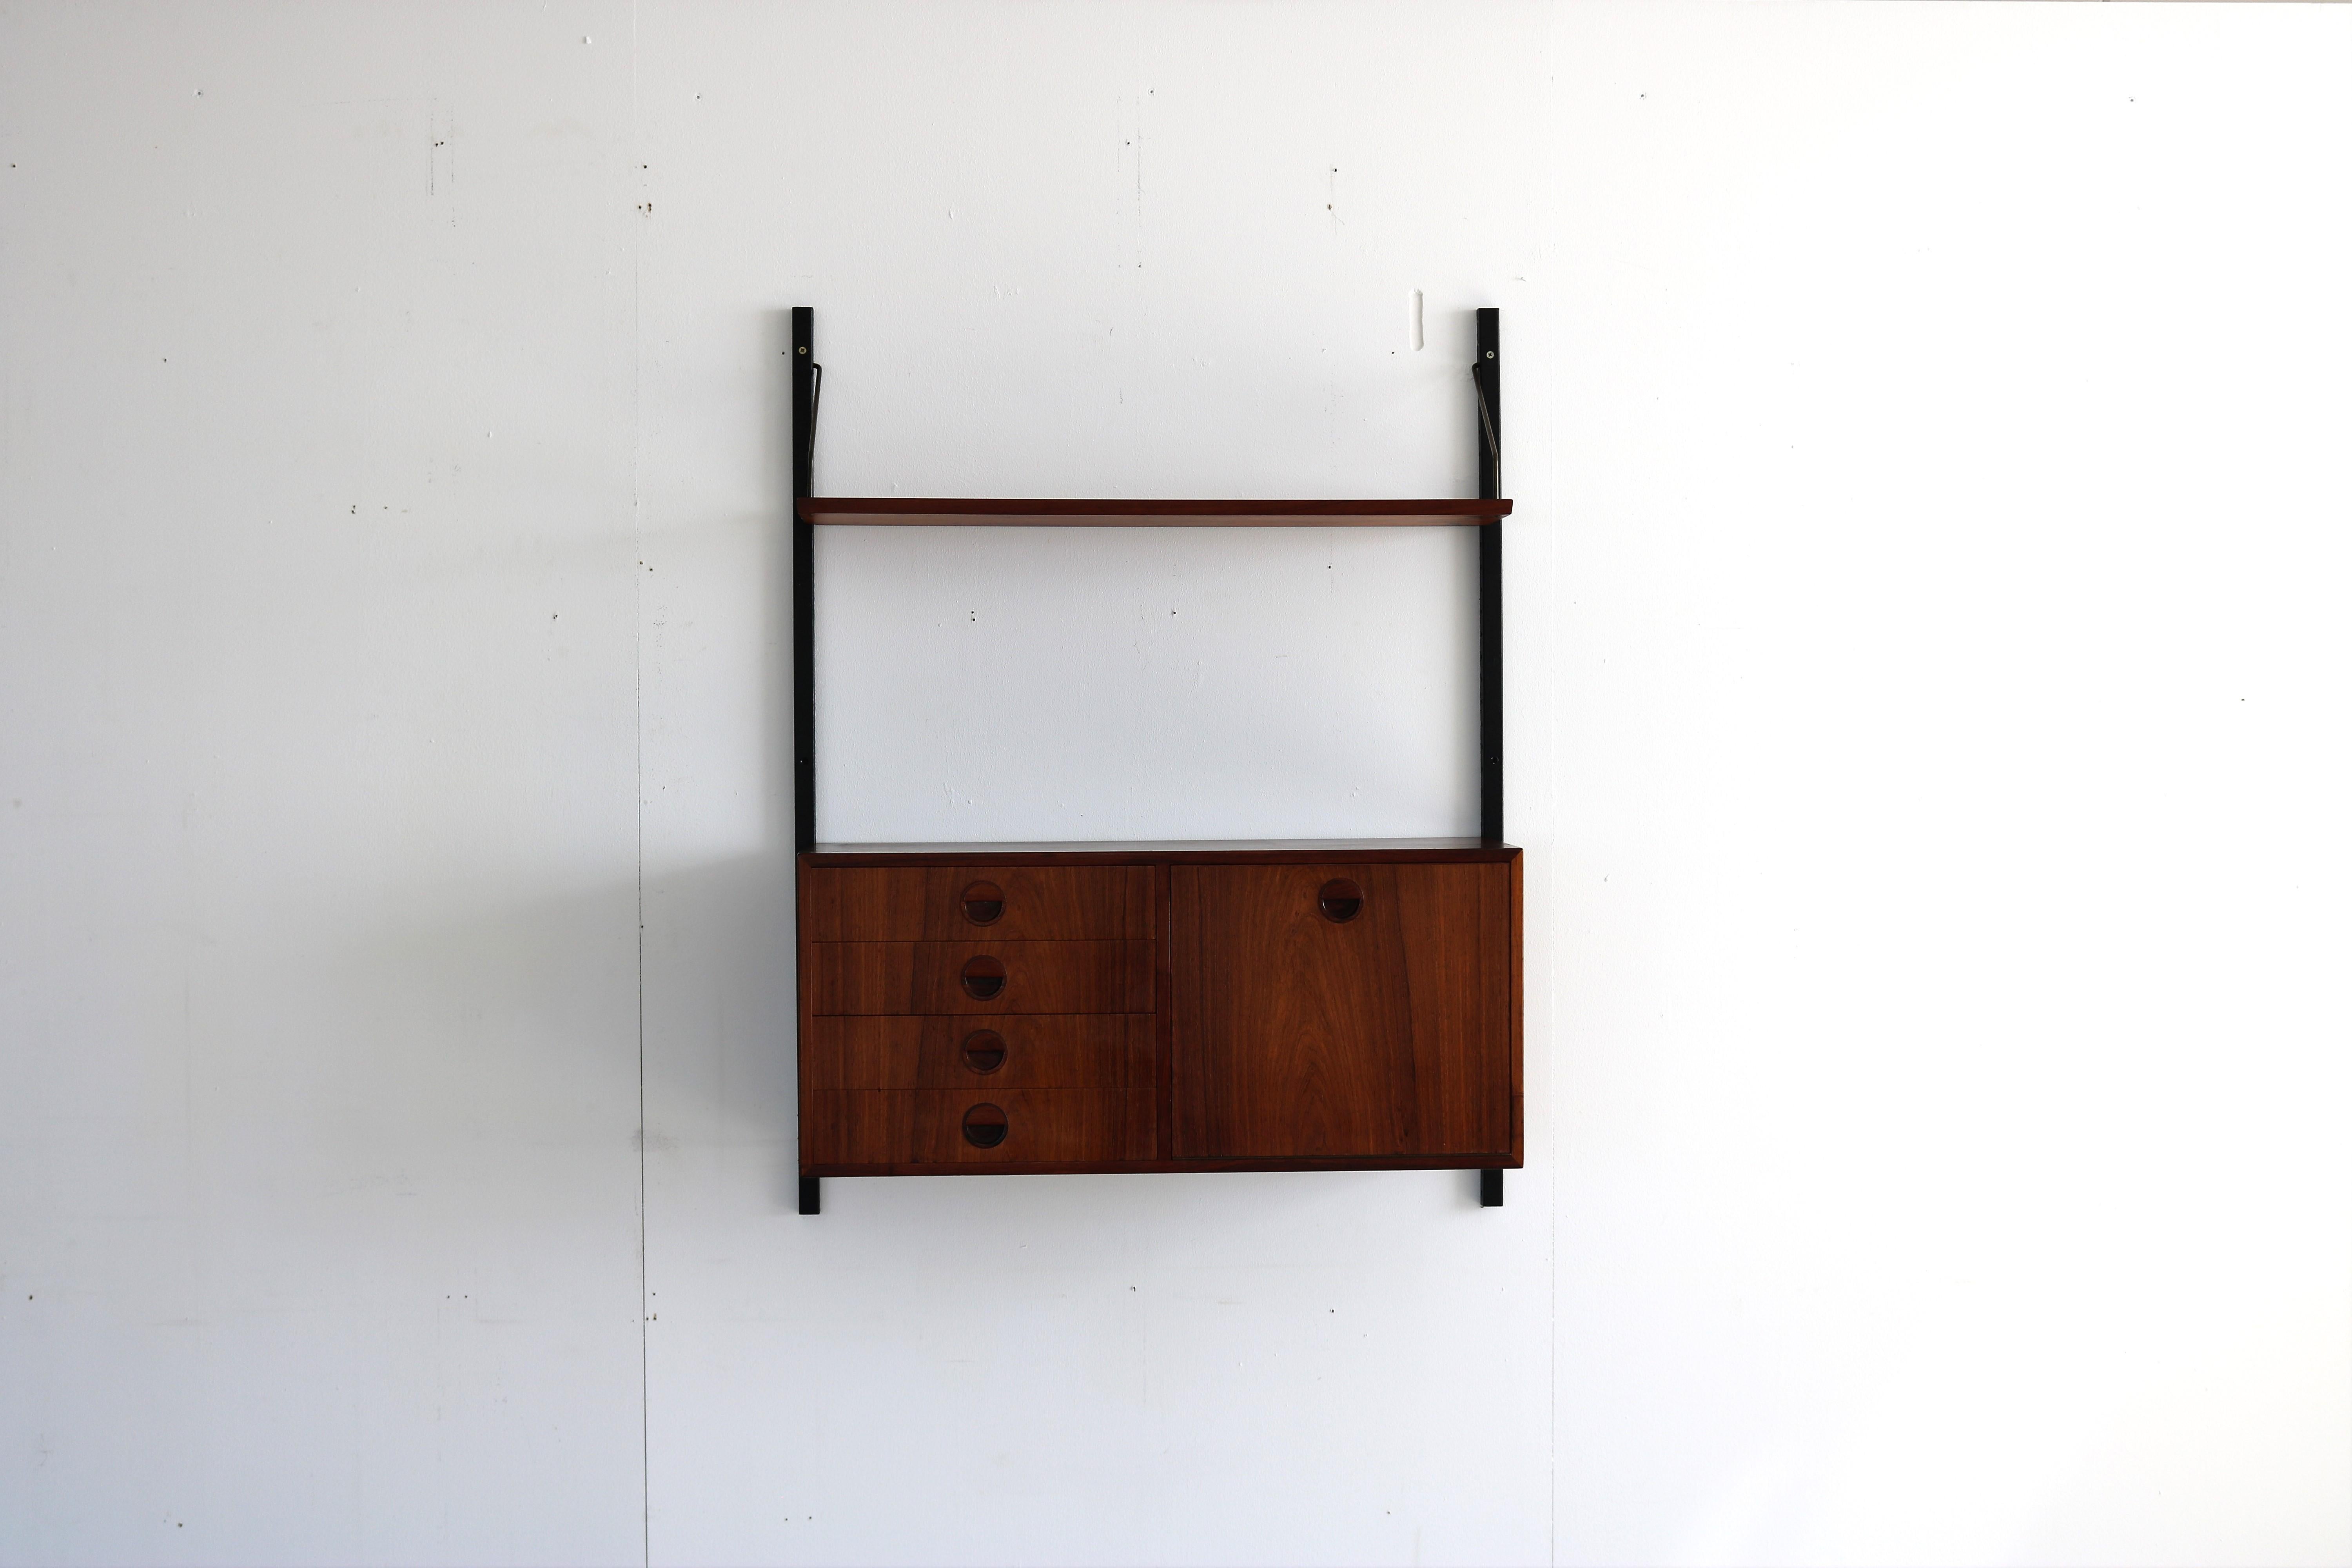 Vintage wall system rosewood HG Furniture Danish (5).

Rosewood wall system from HG Furniture. The system is of high quality and can be arranged according to your own wishes.

Period 1960s
Designs HG Furniture Denmark
conditions good light